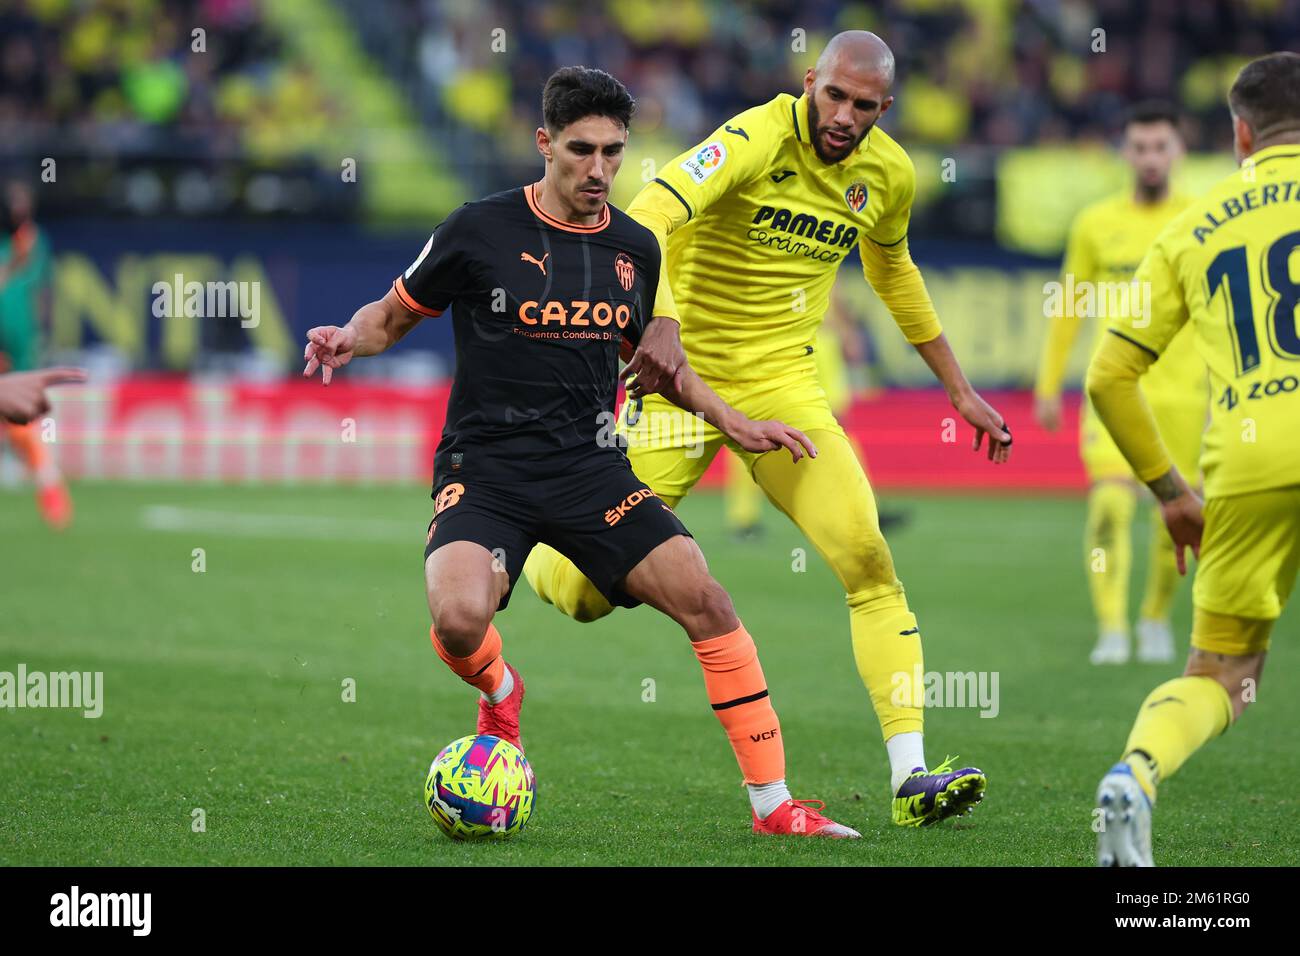 Andre Almeida of Valencia CF in action during the La Liga match between Villarreal CF and Valencia CF at Estadio de la Ceramica in Villarreal, Spain. Stock Photo